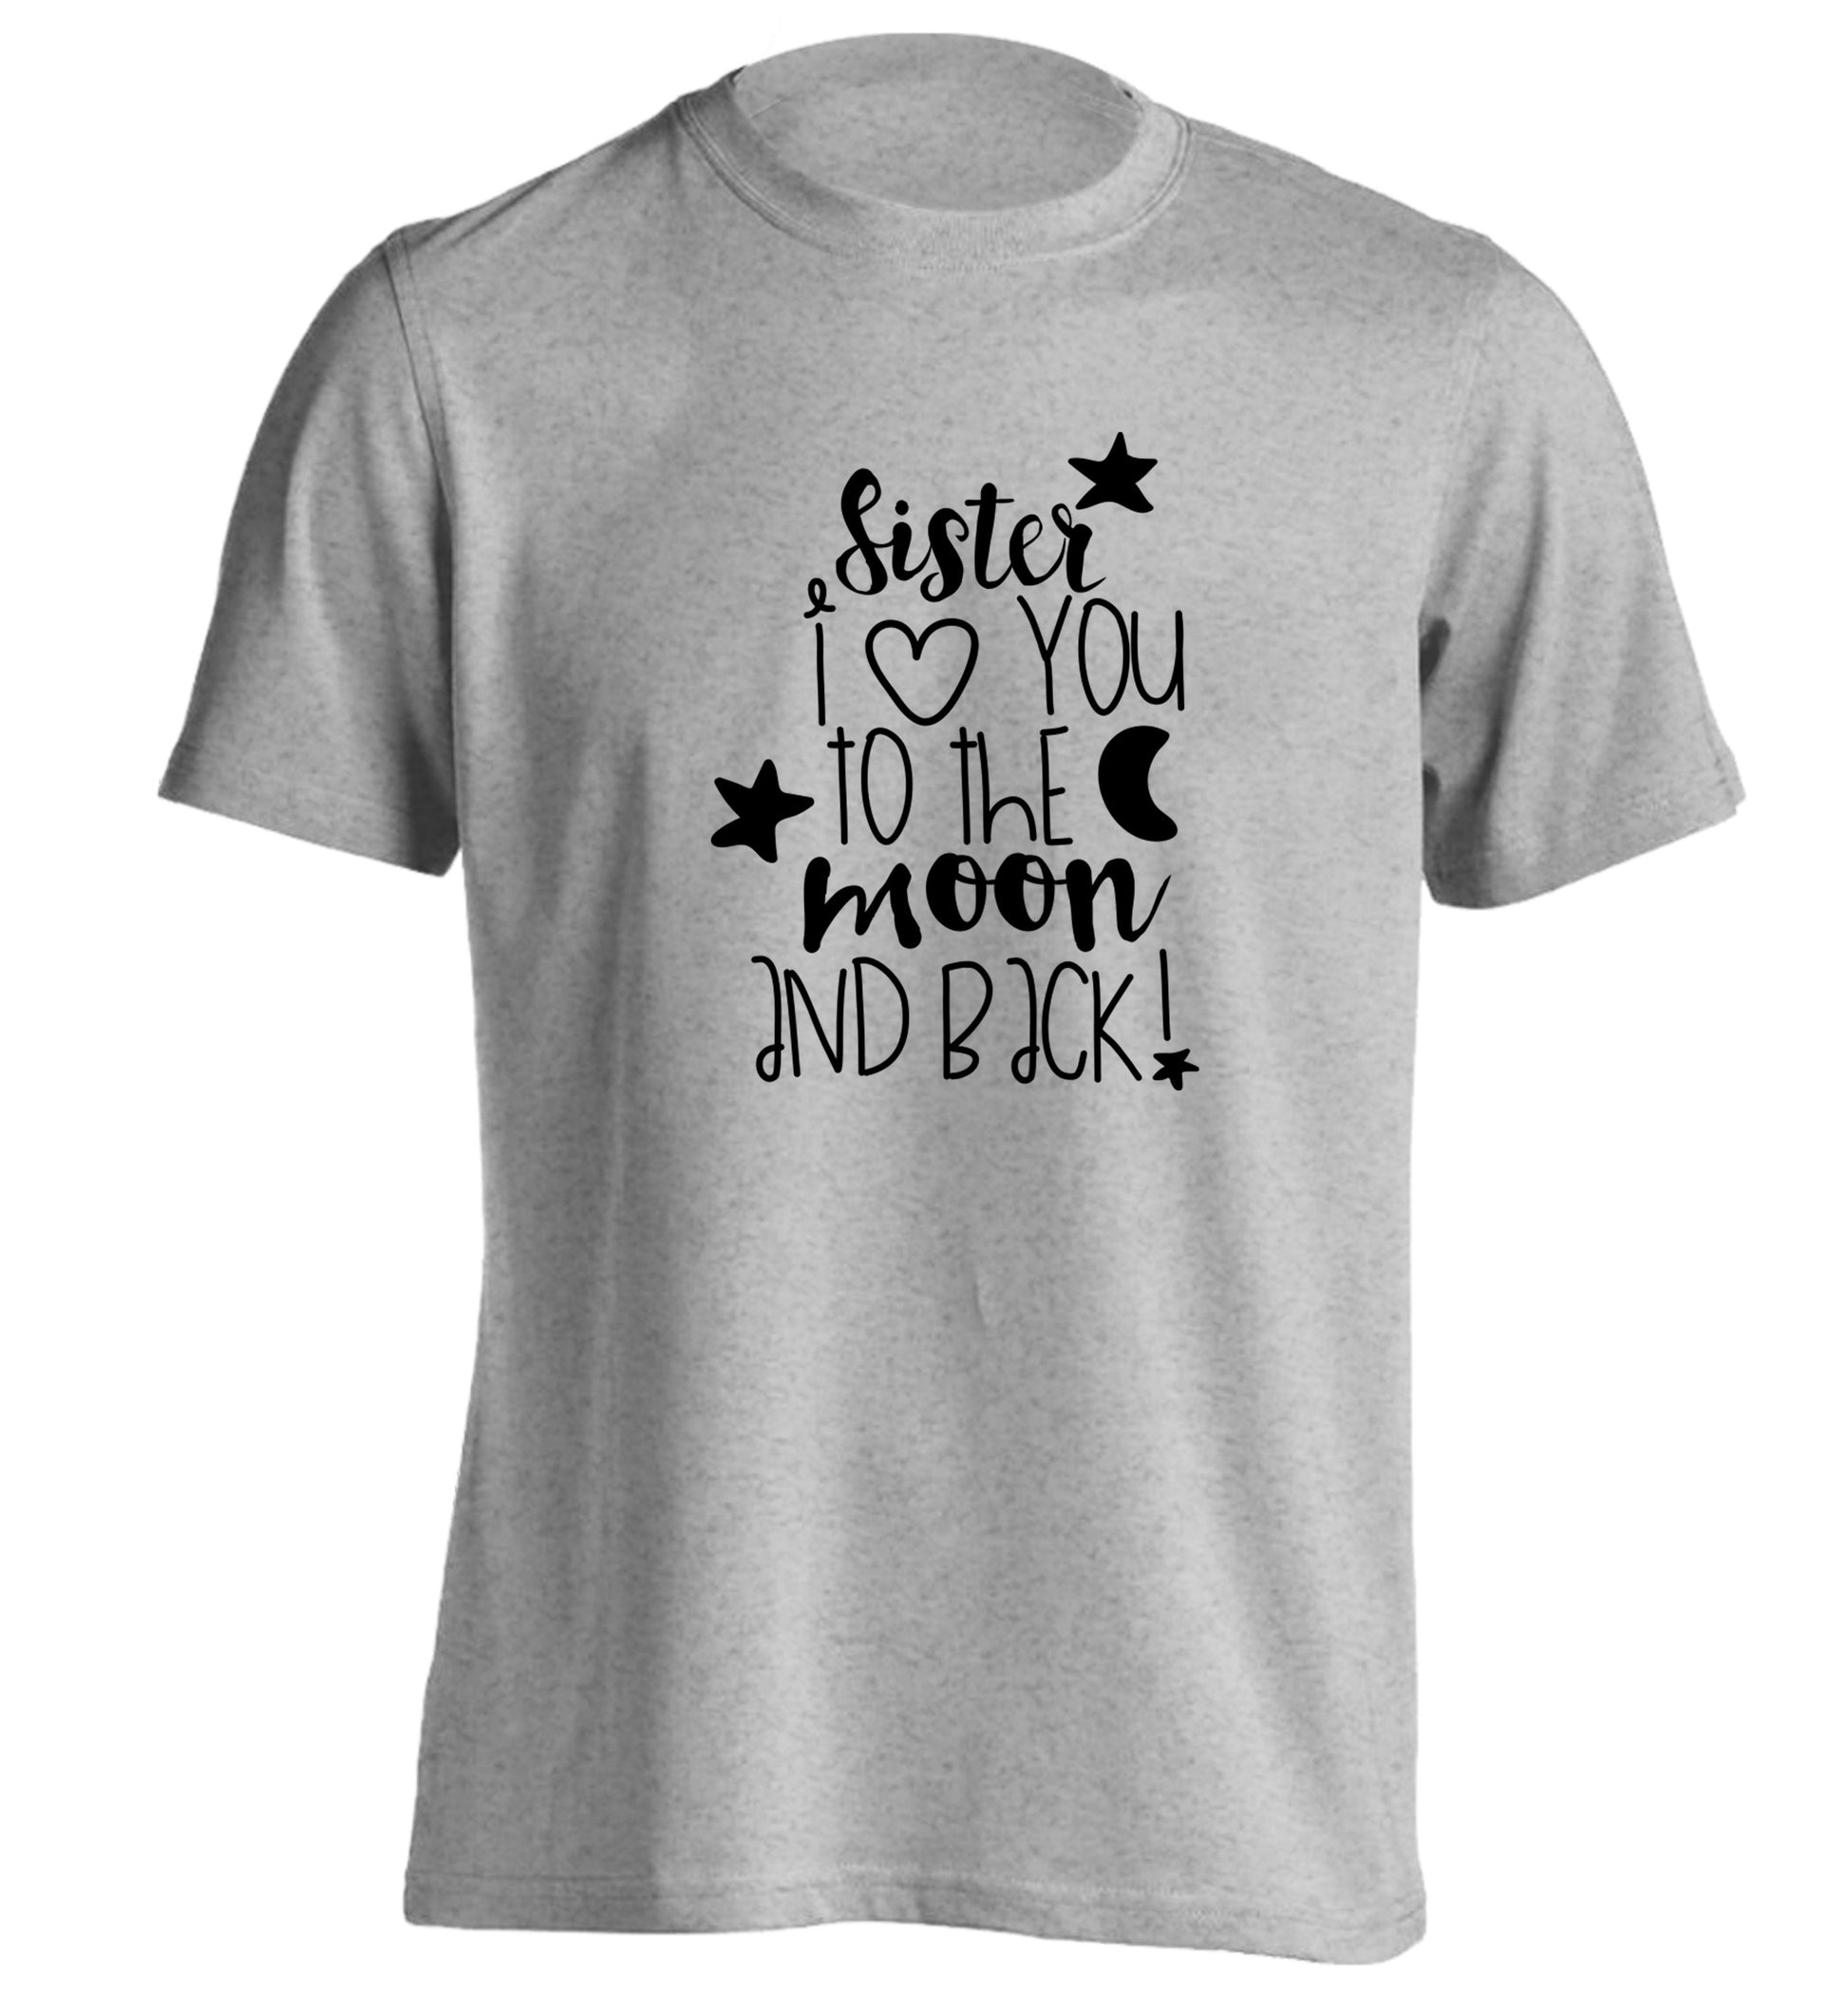 Sister I love you to the moon and back adults unisex grey Tshirt 2XL